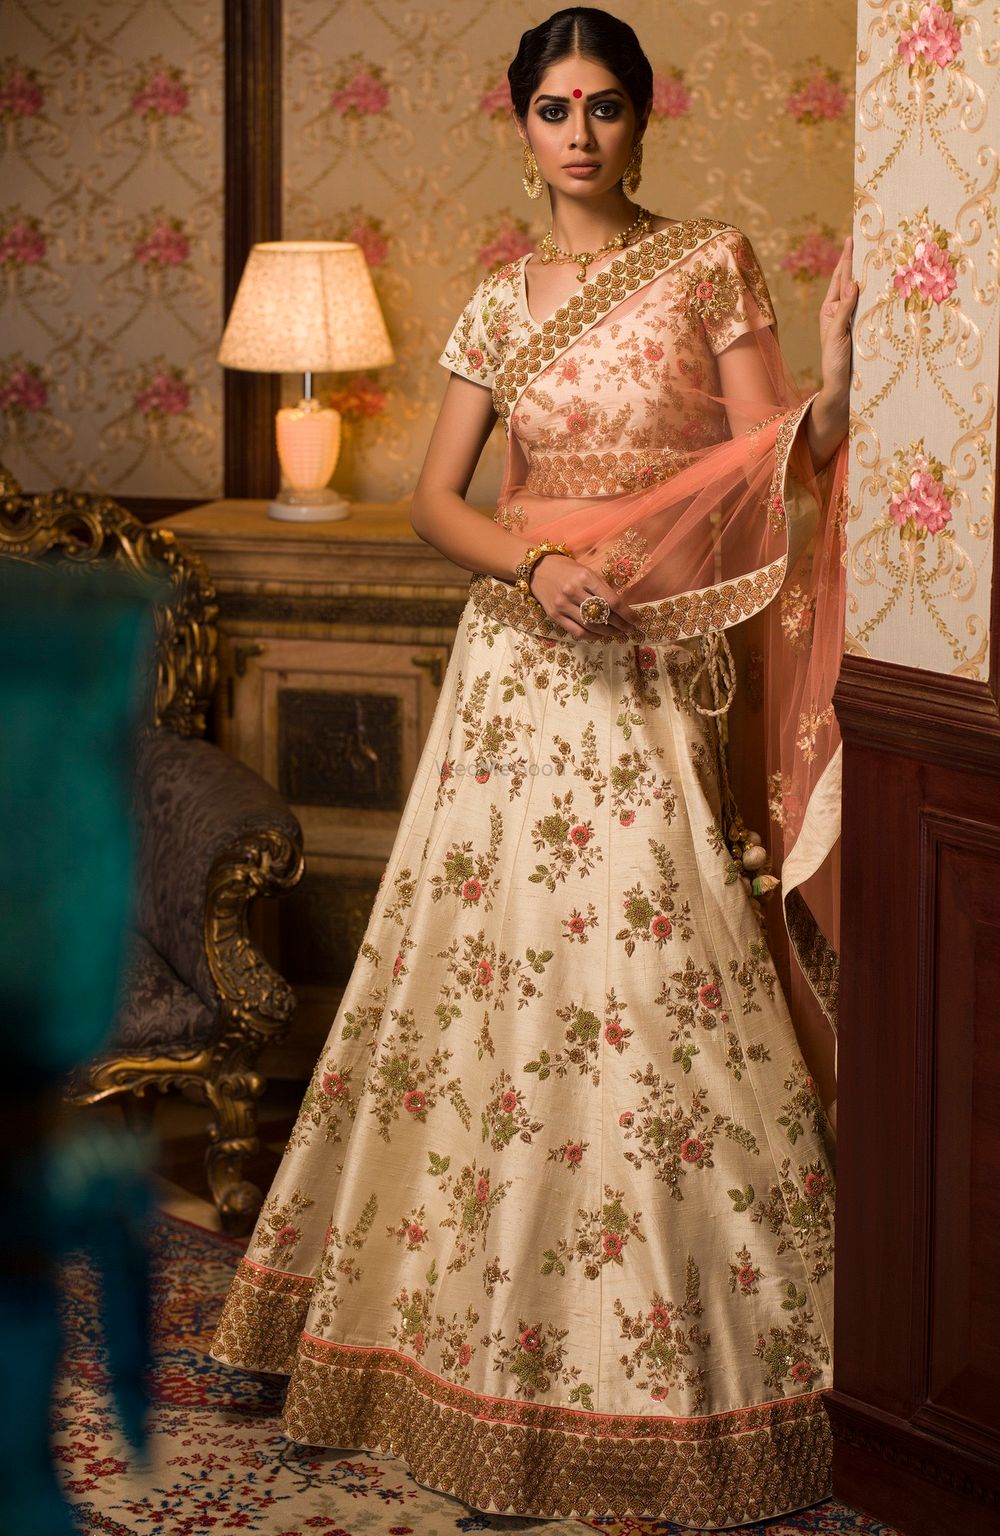 Photo of White floral lehenga with gold borders and peach dupatta for mehendi